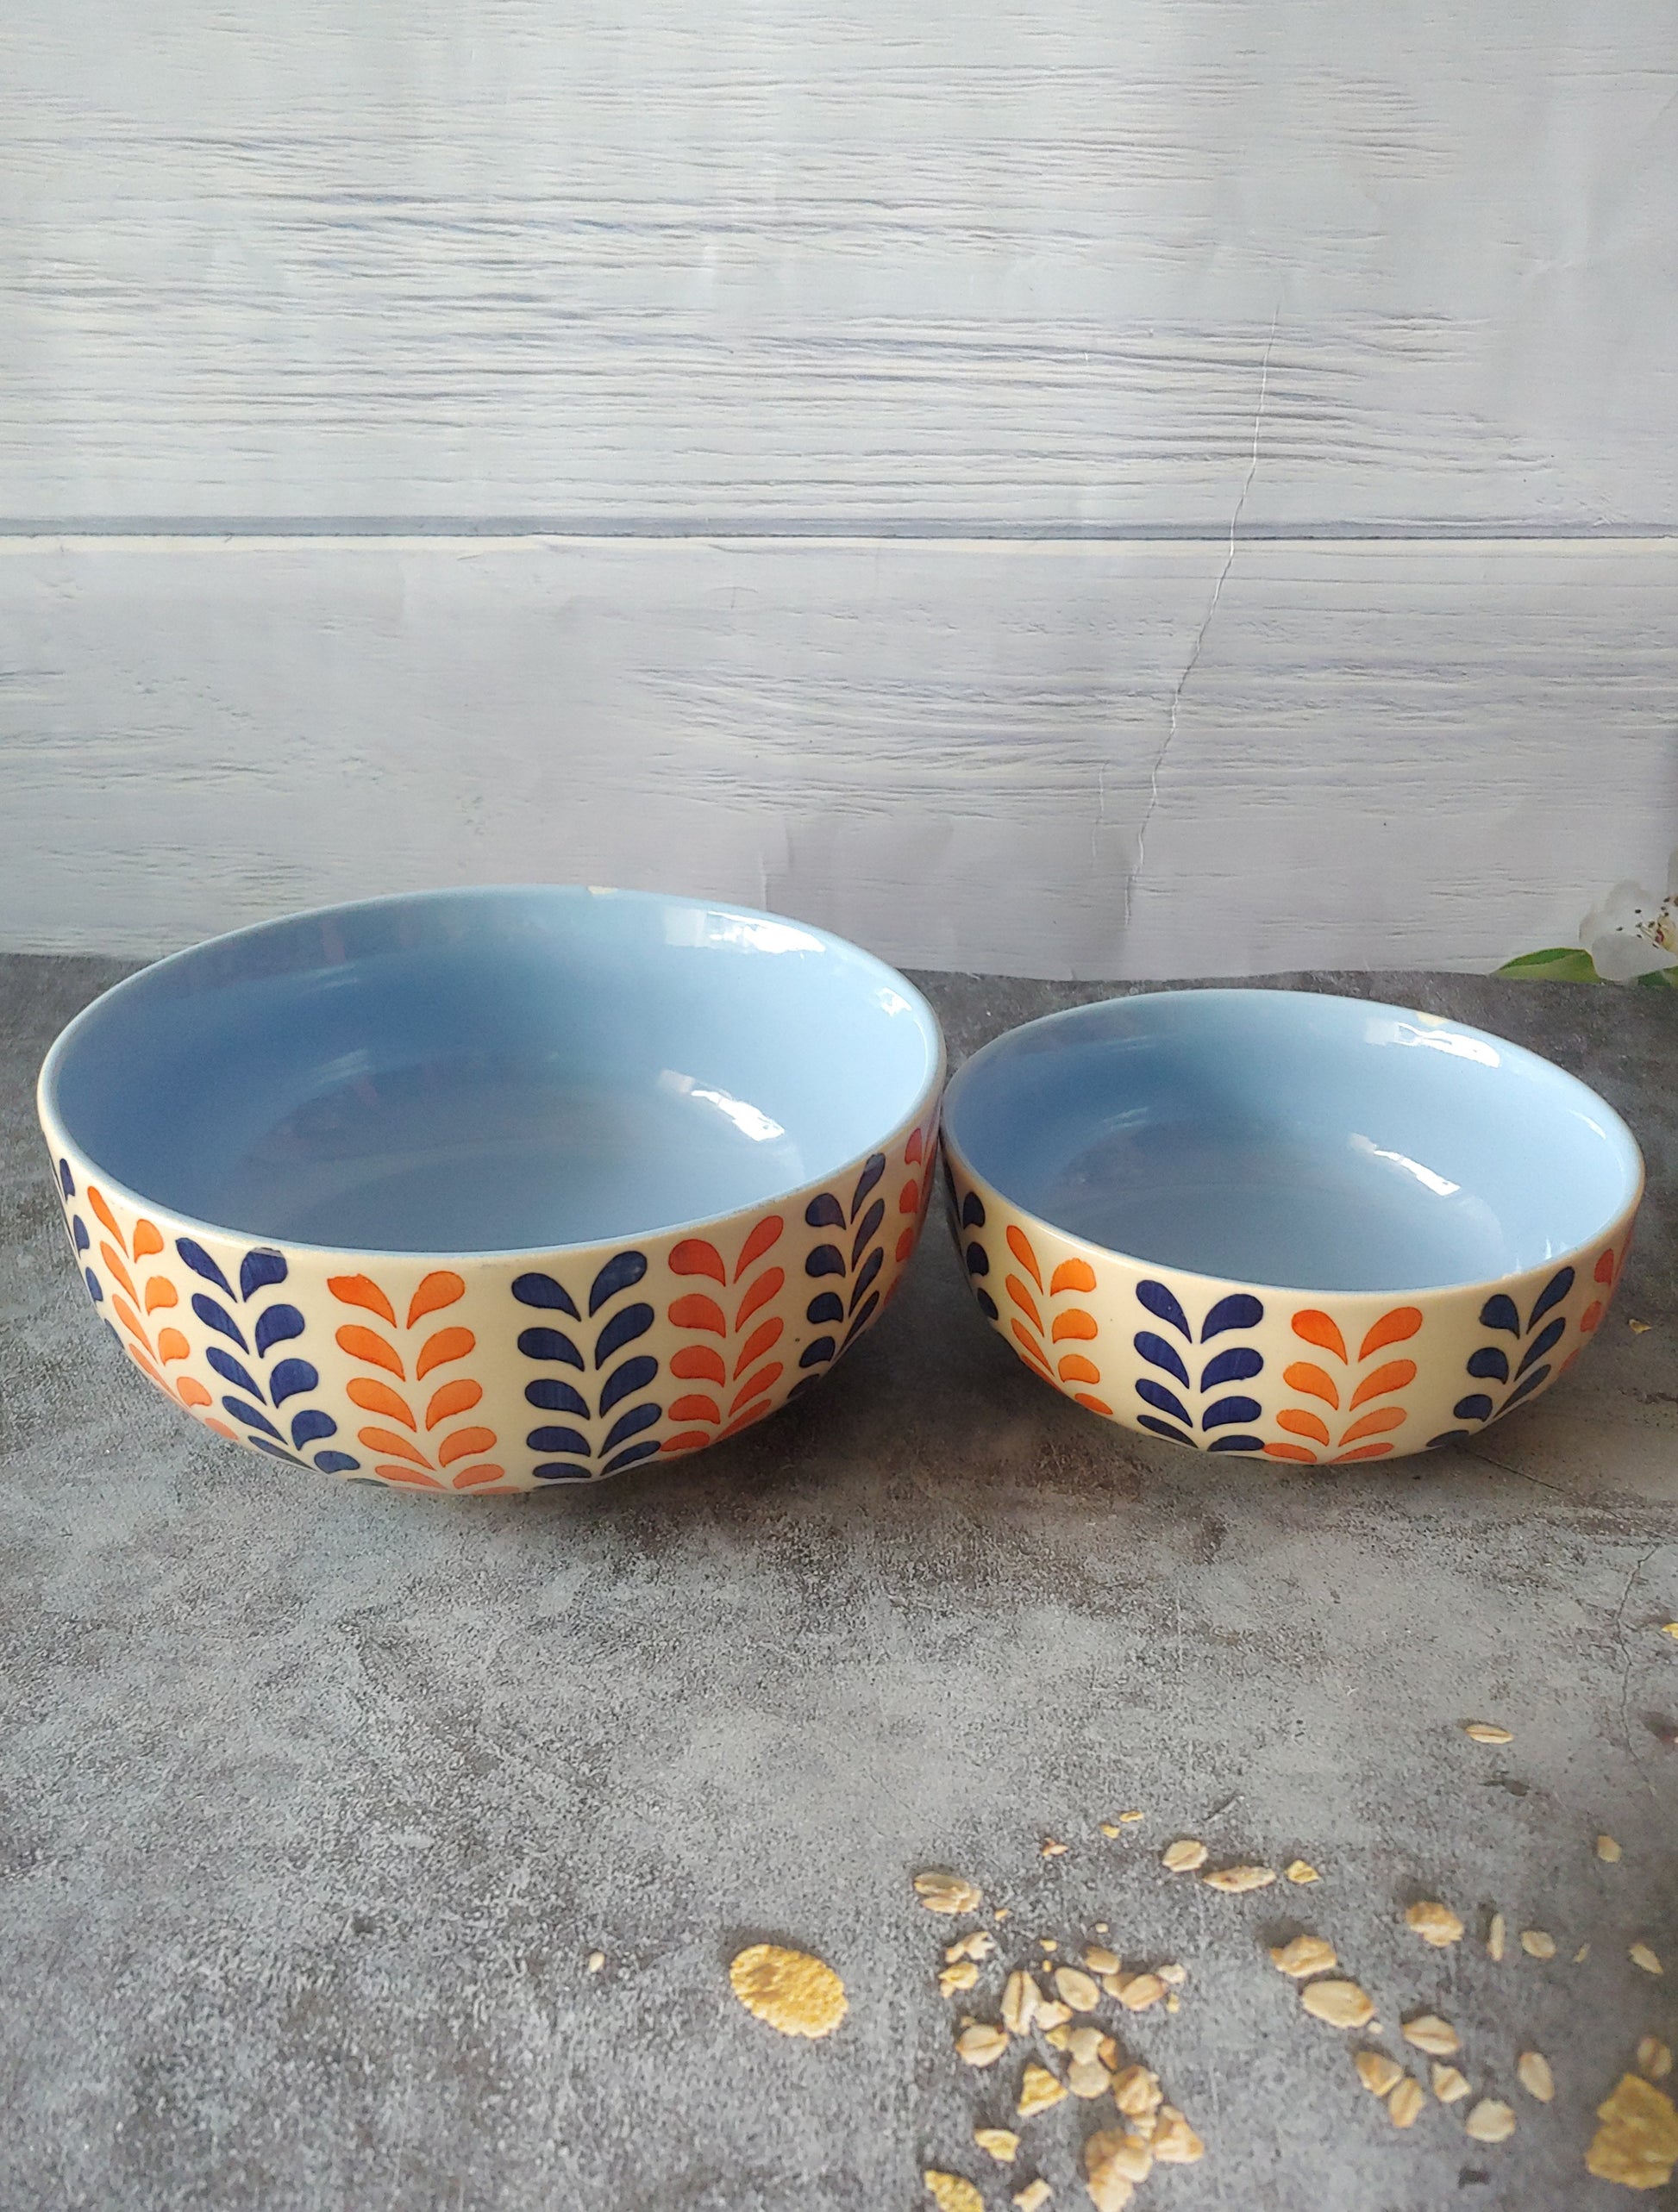 Mixing Bowls, Ceramic Mixing Bowls for Kitchen, Colorful Vibrant